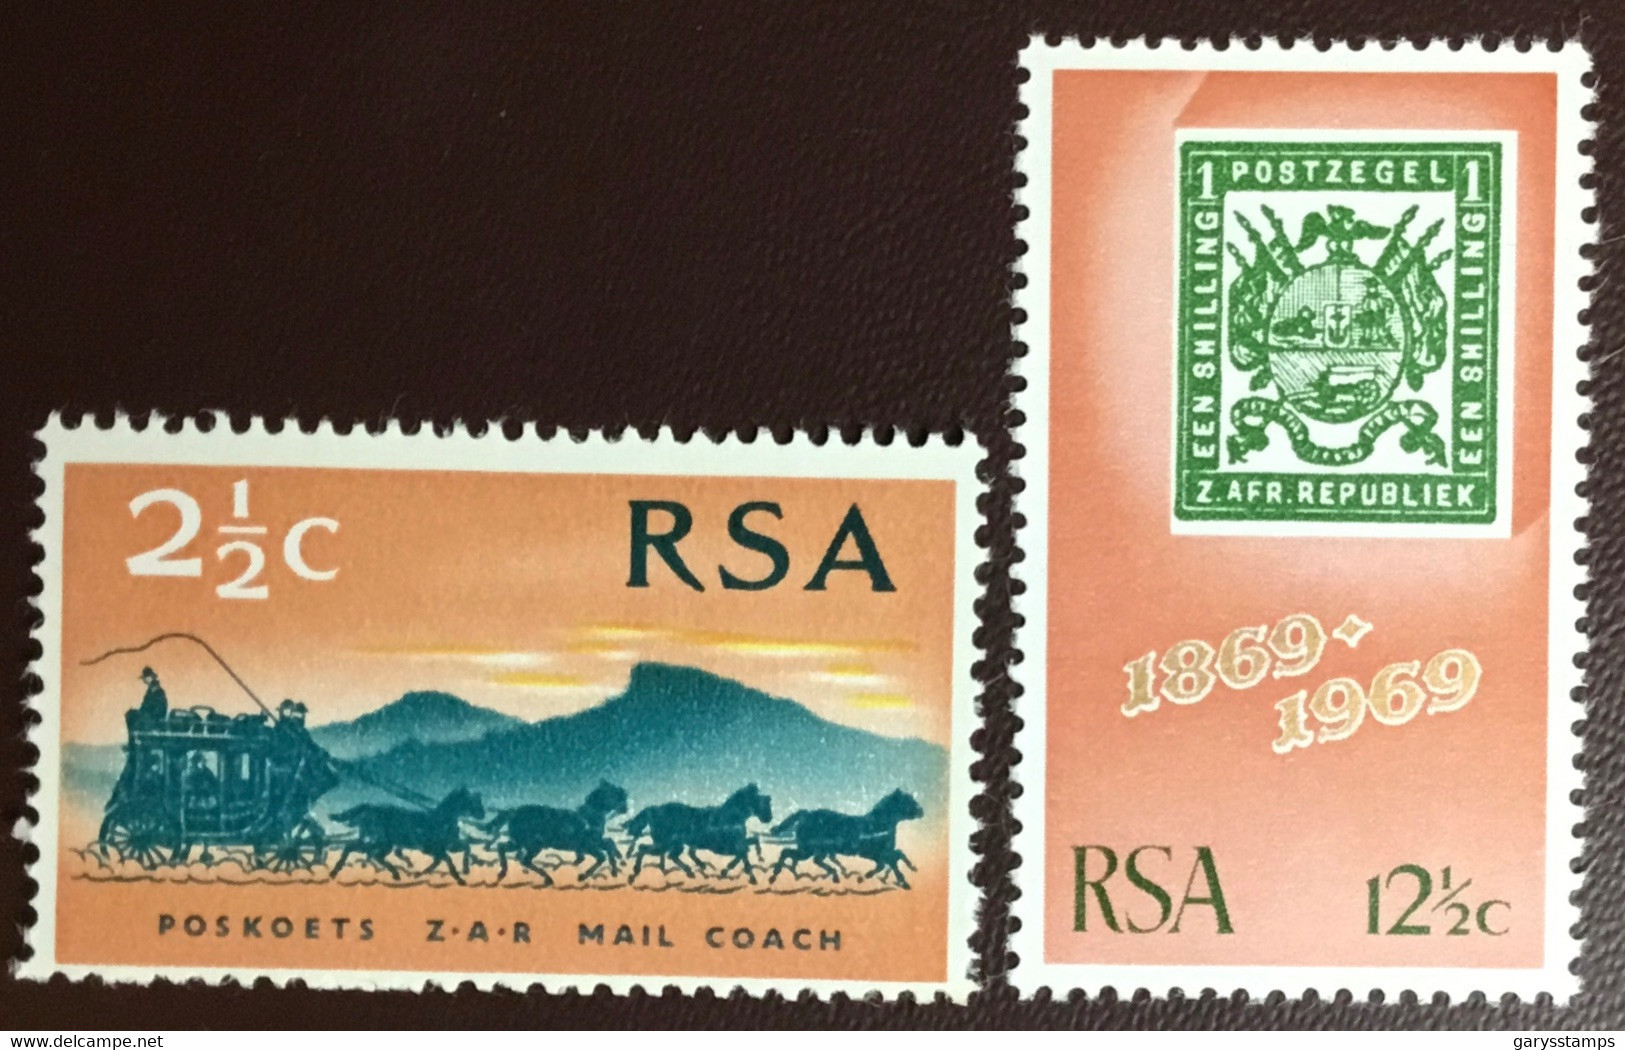 South Africa 1969 Stamp Centenary MNH - Unused Stamps